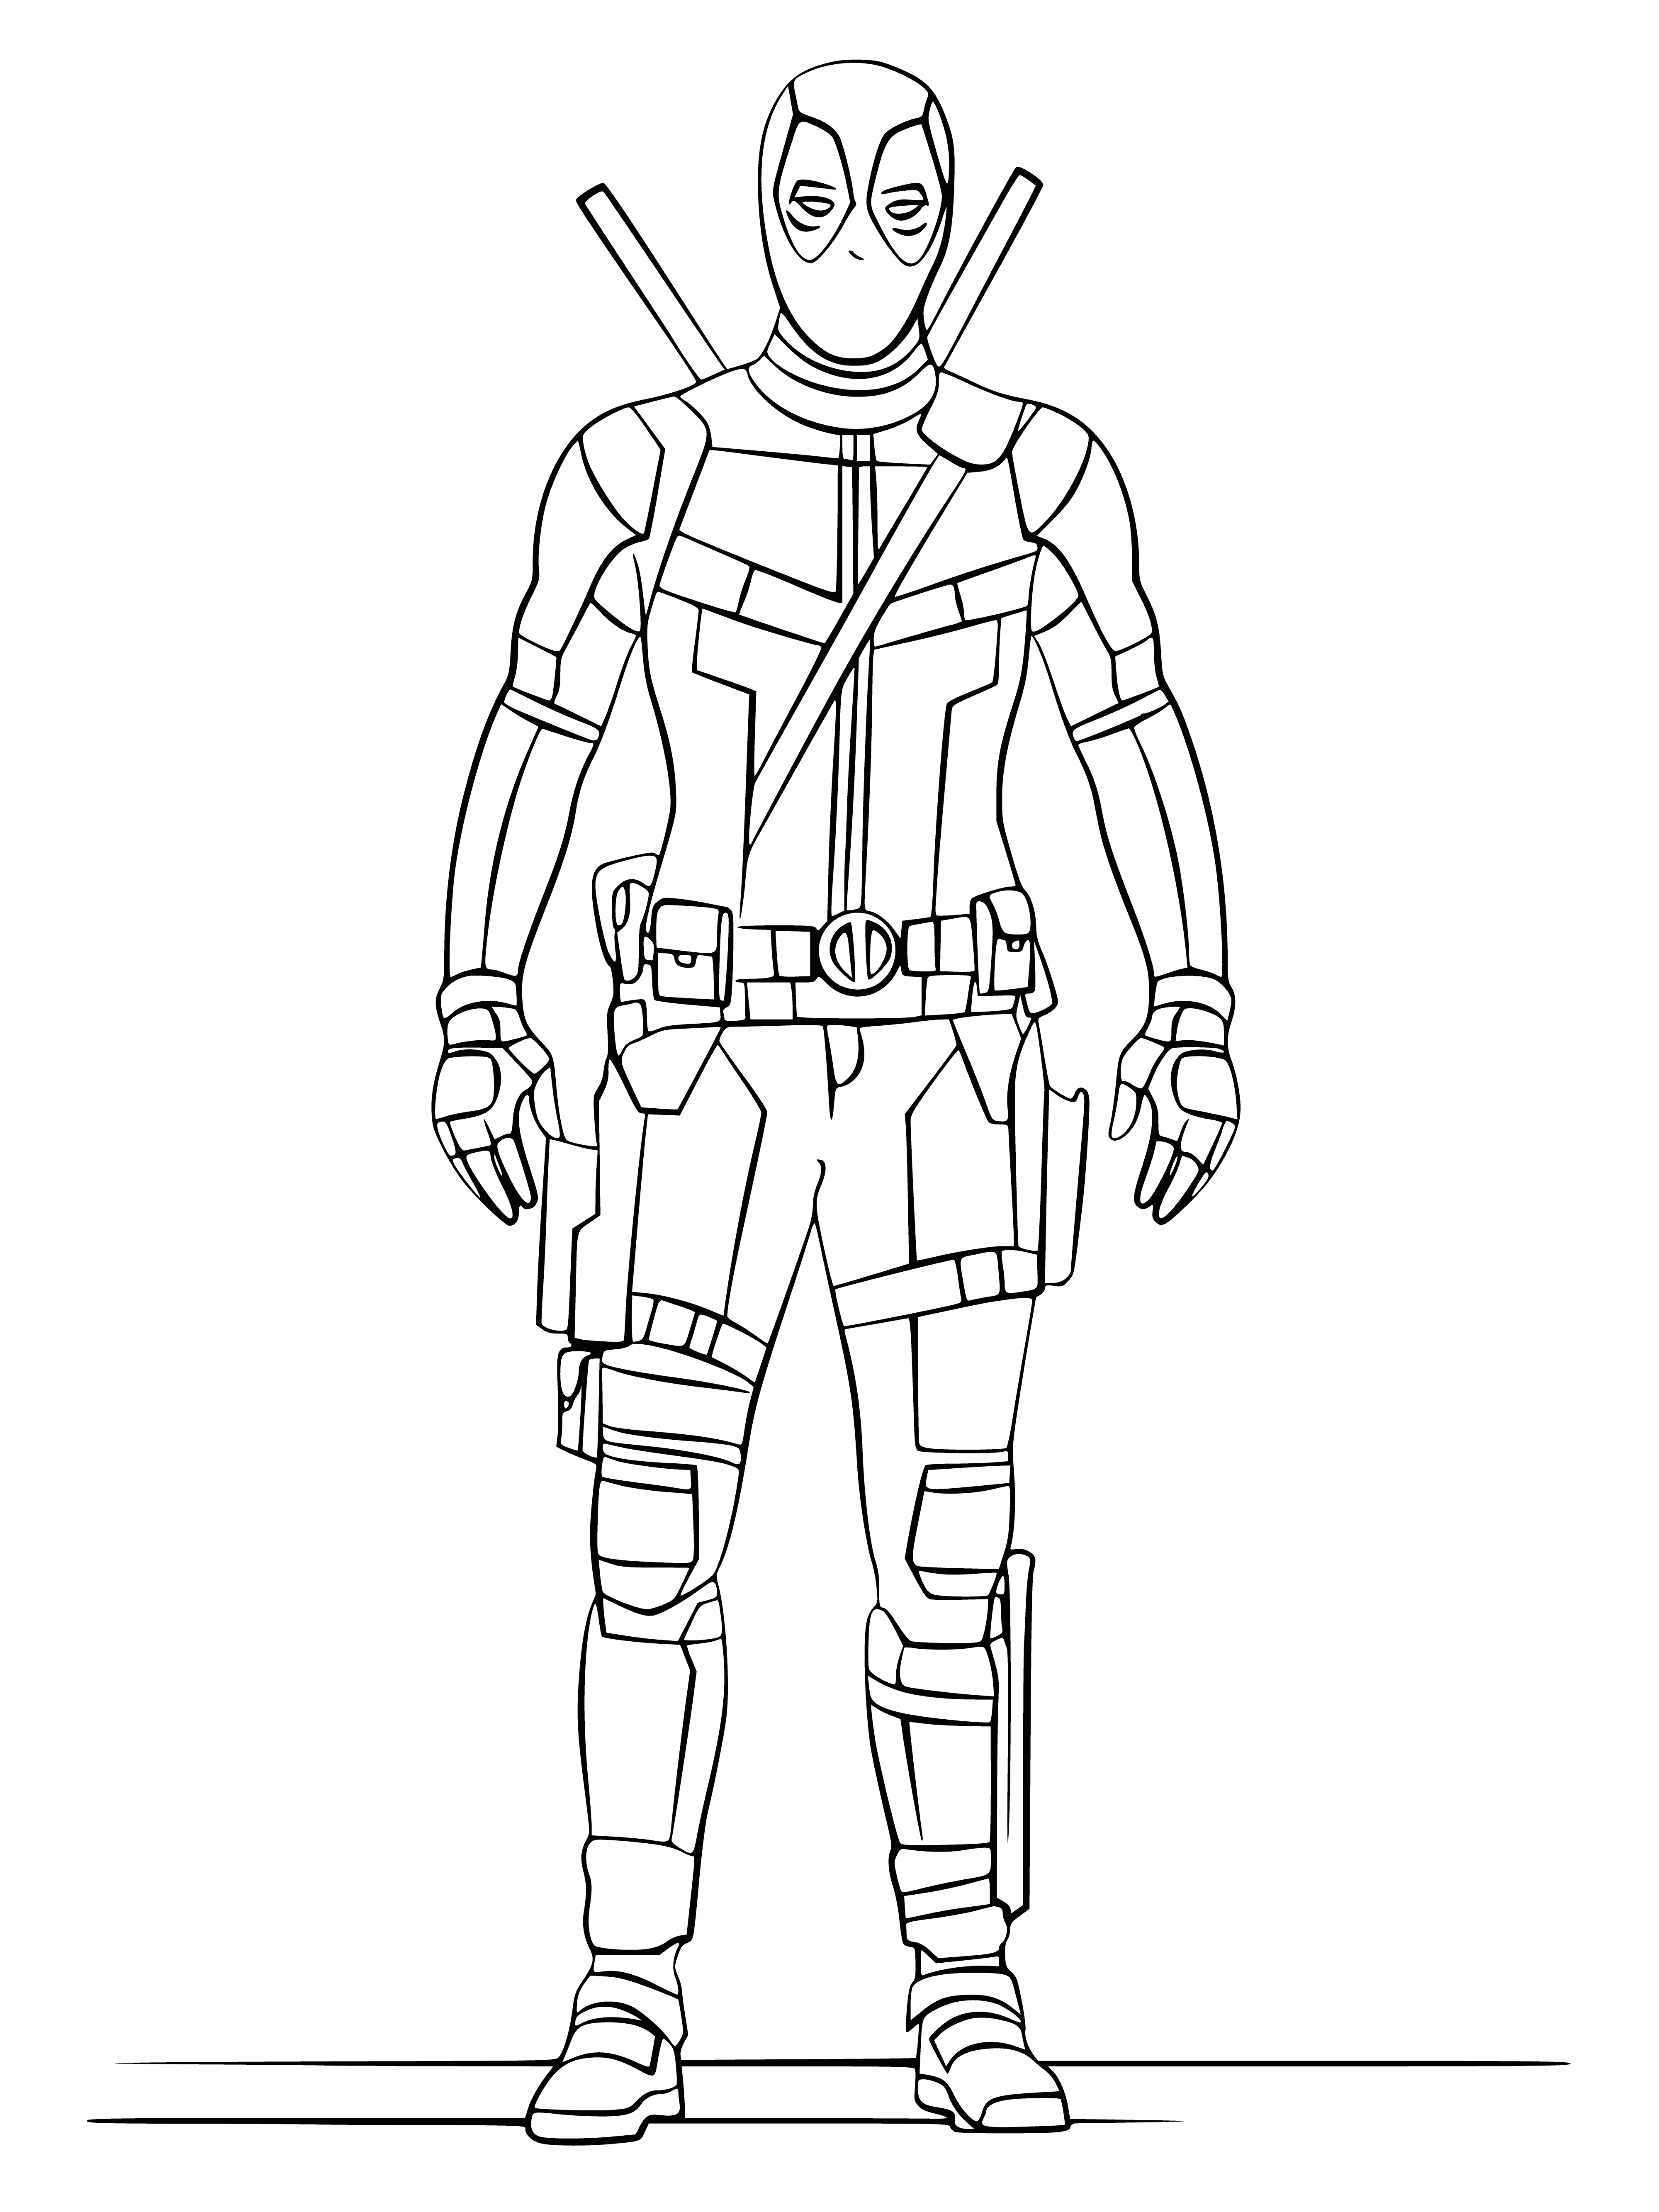 coloring page: Man in red/black masked costume, black belt with "D" buckle, holding 2 katanas.